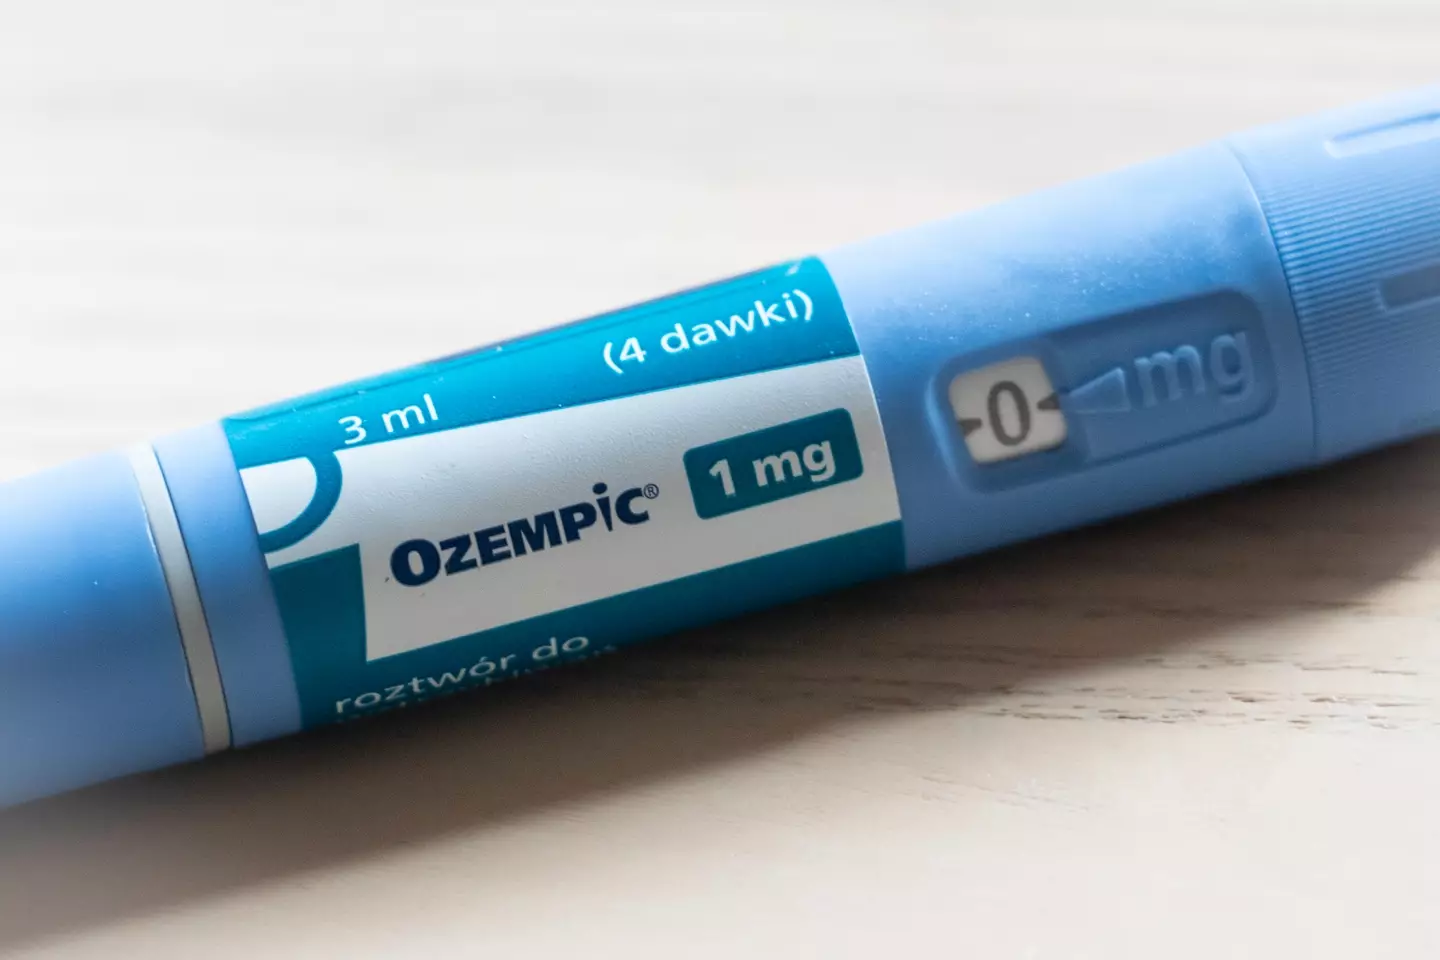 Ozempic is used by people with type 2 diabetes.